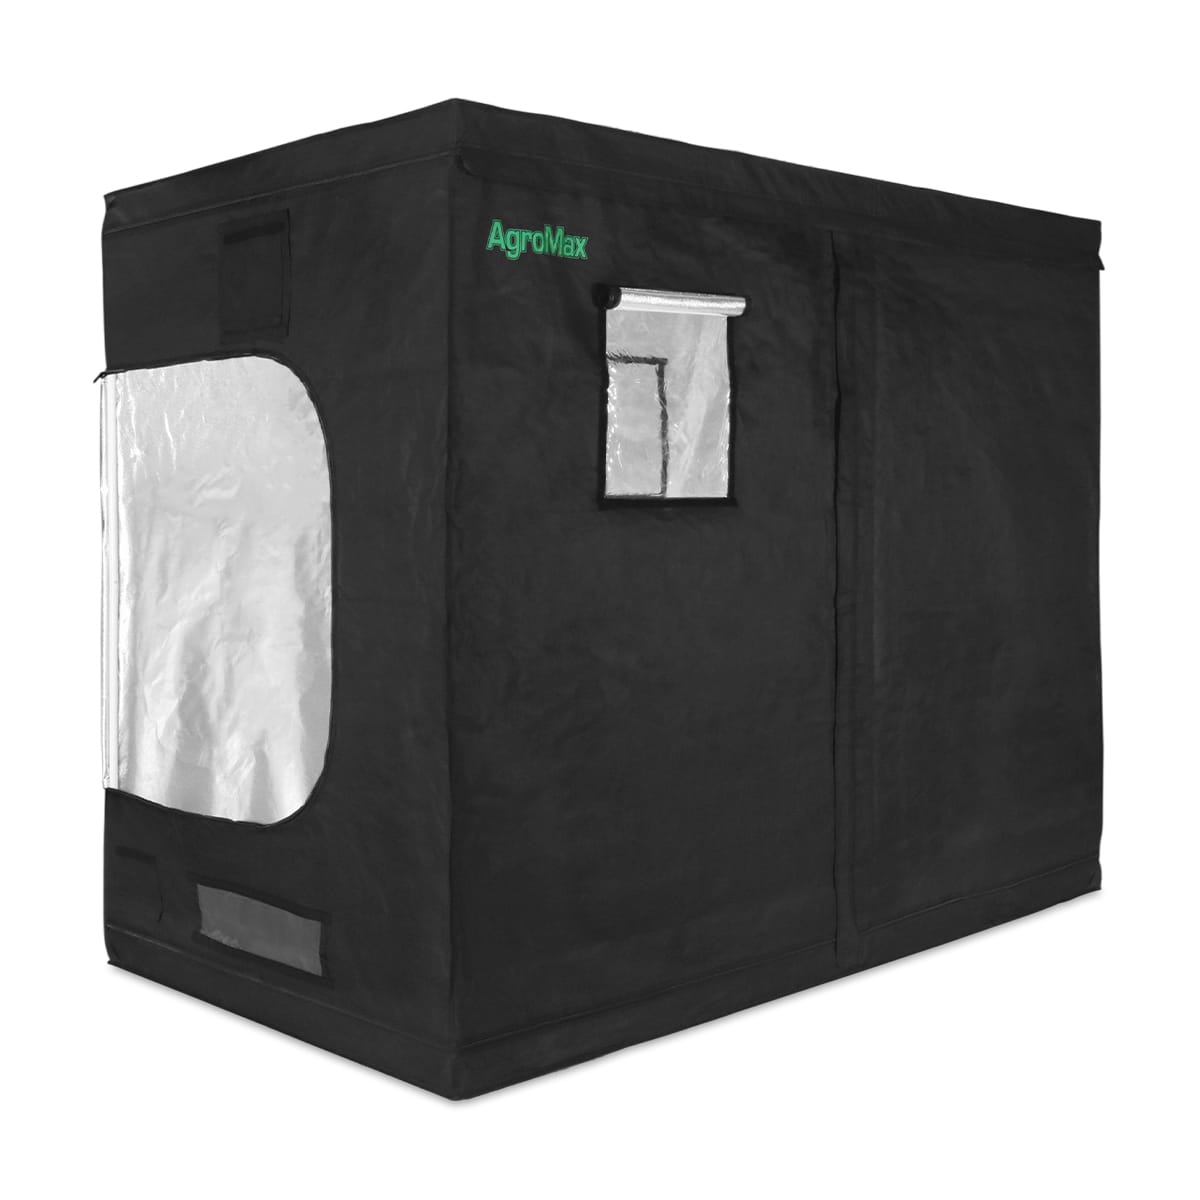 As Voorstellen Lotsbestemming 4x8 Grow Tent | Buy the AgroMax 4x8 Grow Tent Setup for Large Gardens | HTG  Supply